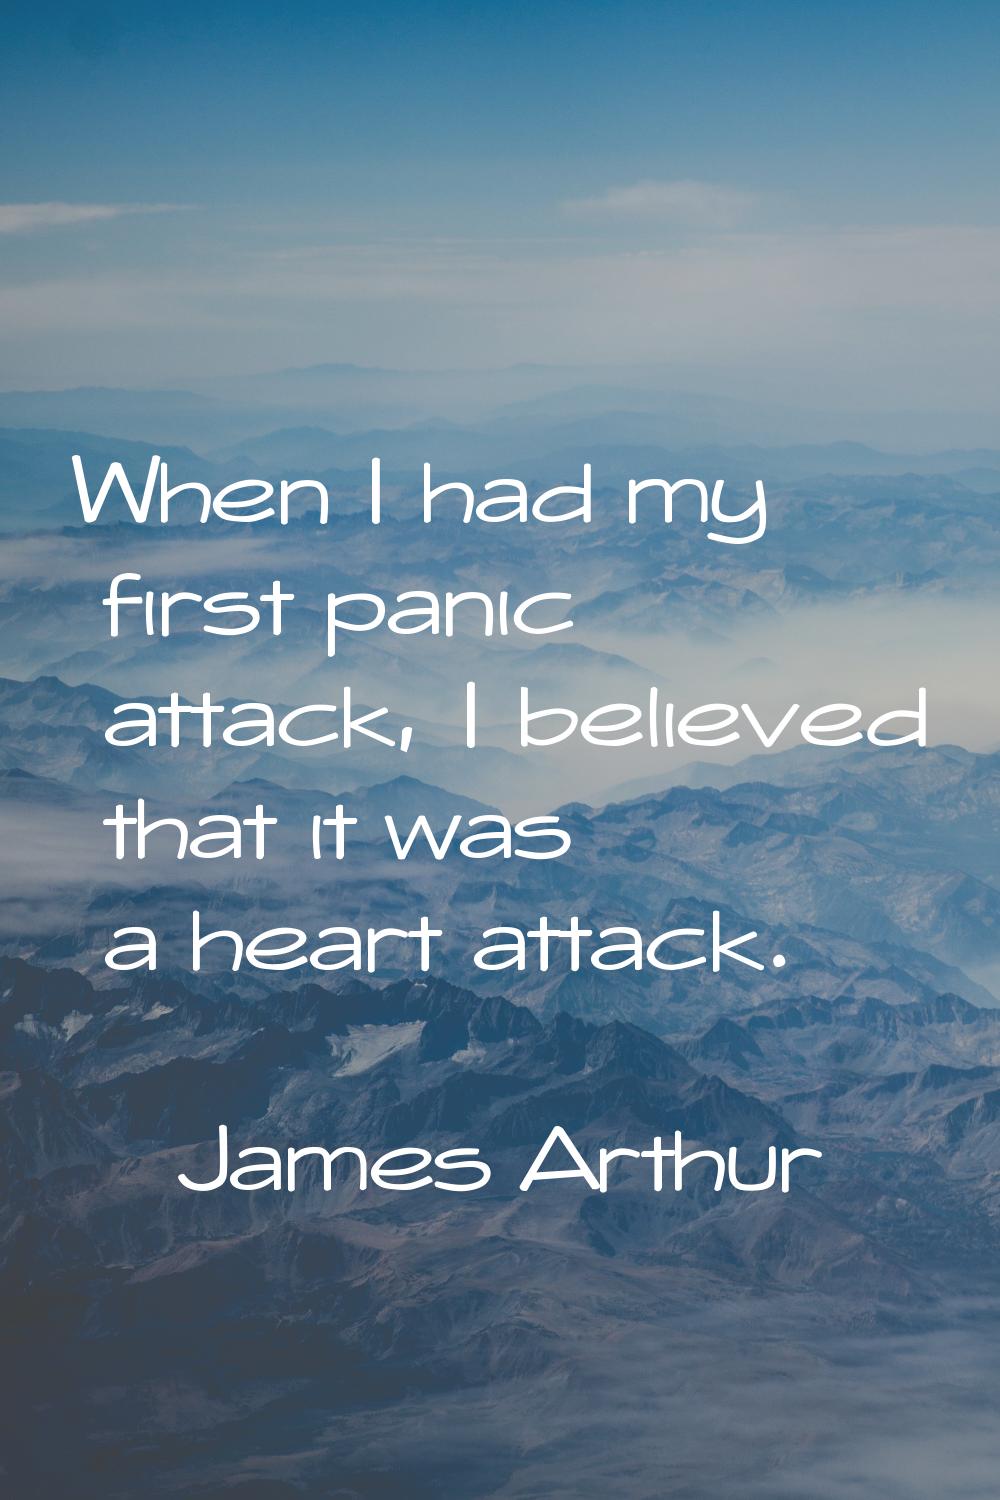 When I had my first panic attack, I believed that it was a heart attack.